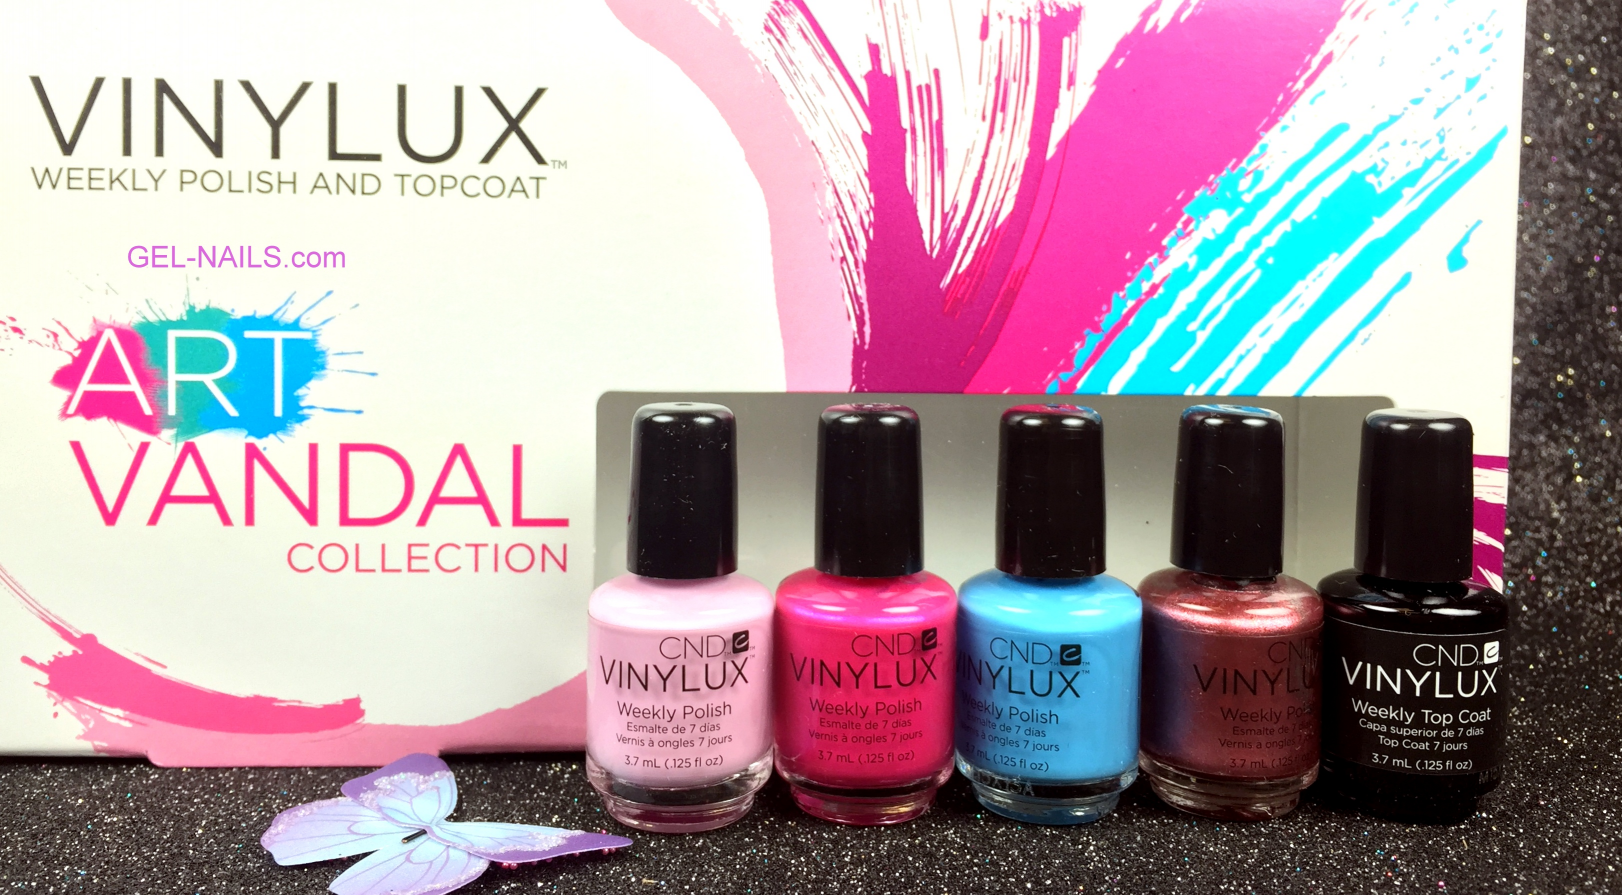 CND VINYLUX: A Stunning Addition To Shellac Nail Colors